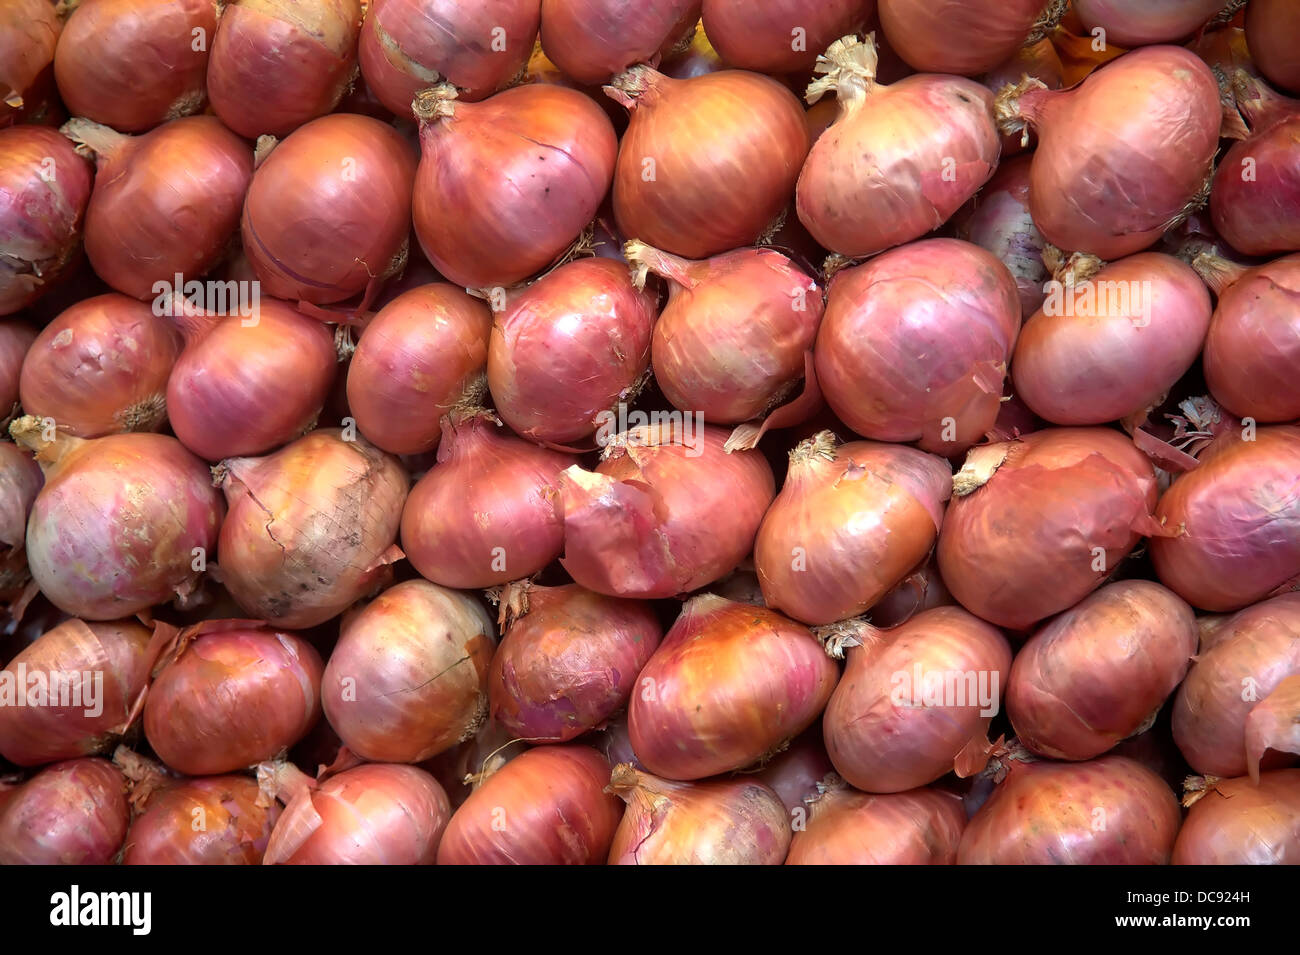 Onions,onion,bulb,vegetable,raw food,food,stack,rows,pungent, Stock Photo